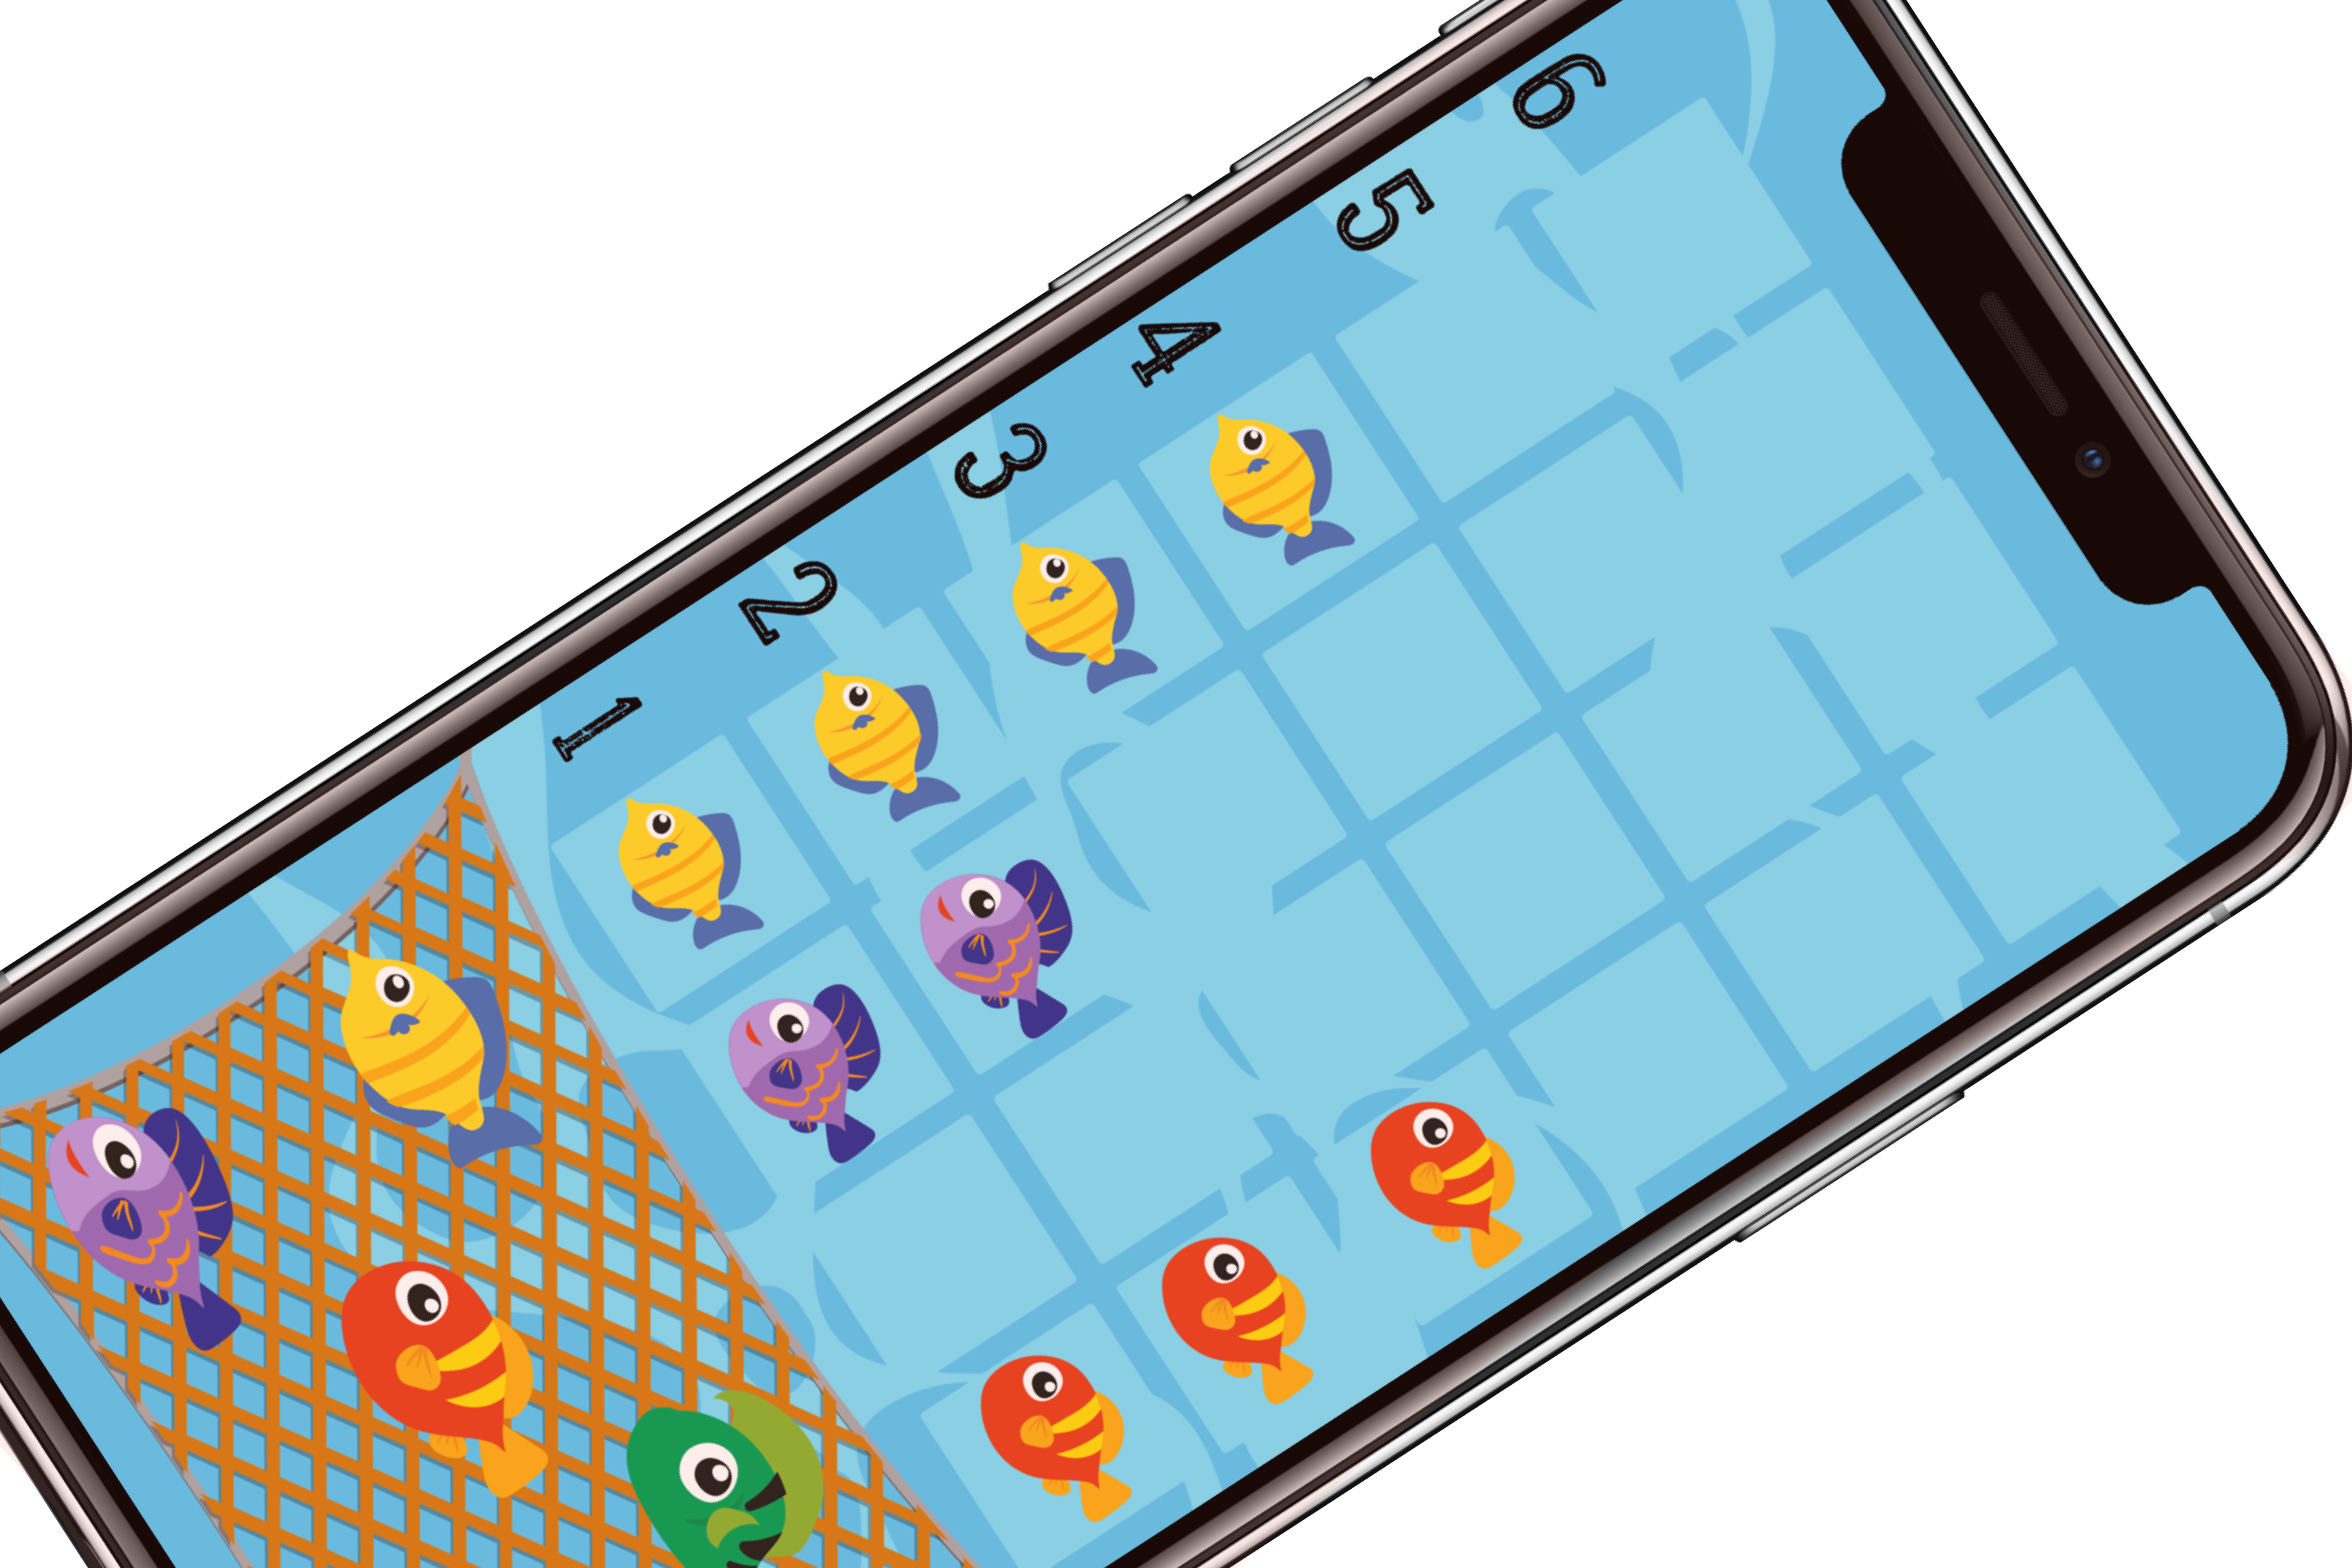 Fish Graphing App